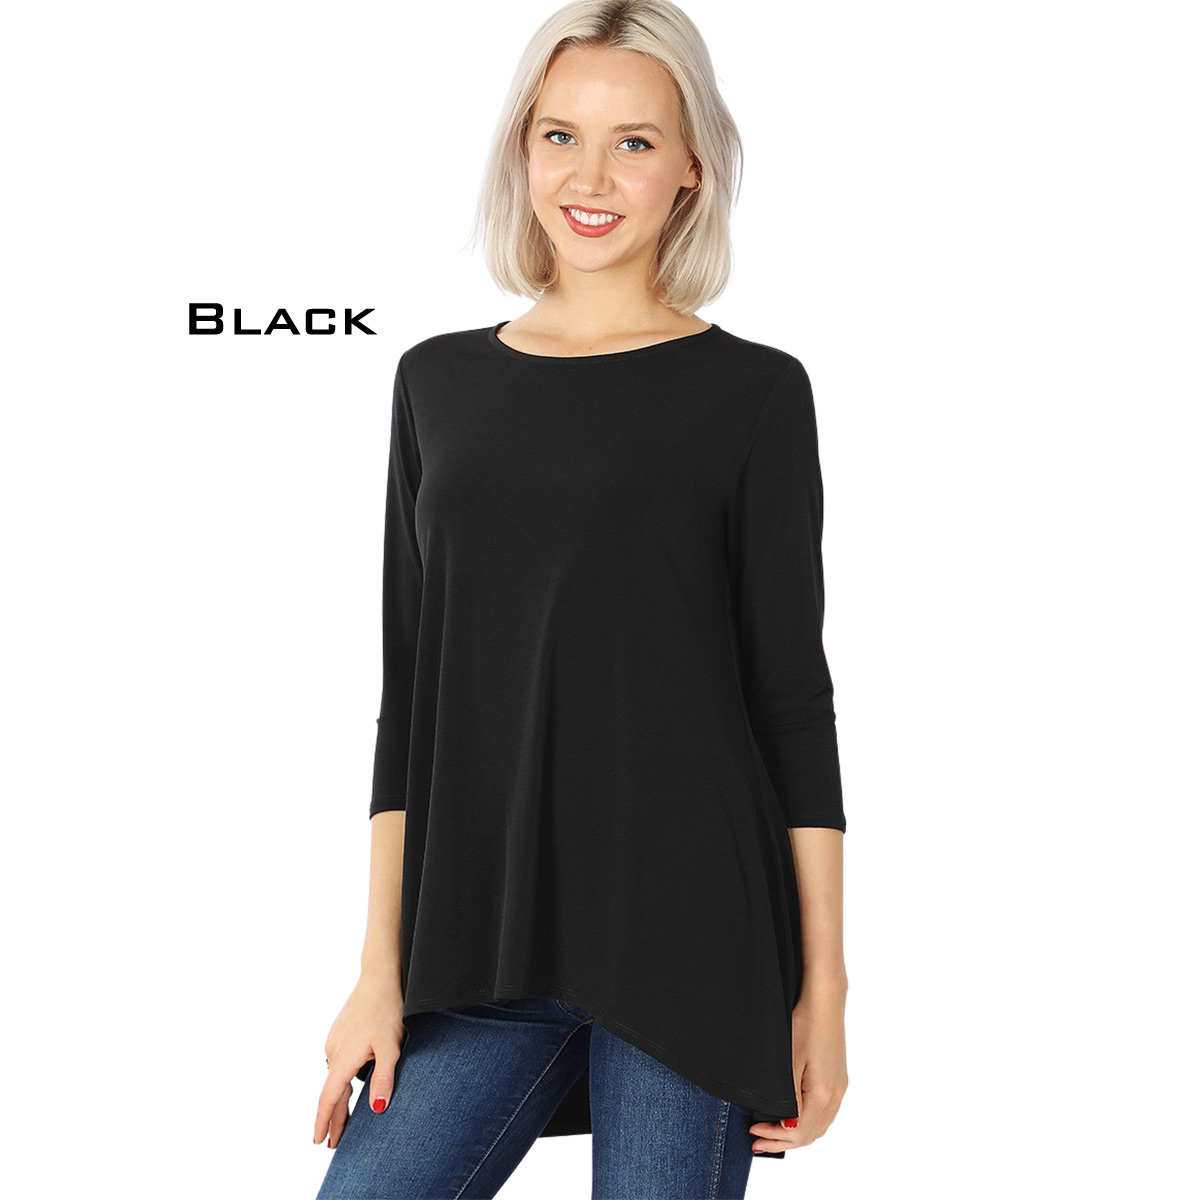 2367 - Ity High-Low 3/4 Sleeve Top BLACK High-Low 3/4 Sleeve Top 2367 - X-Large